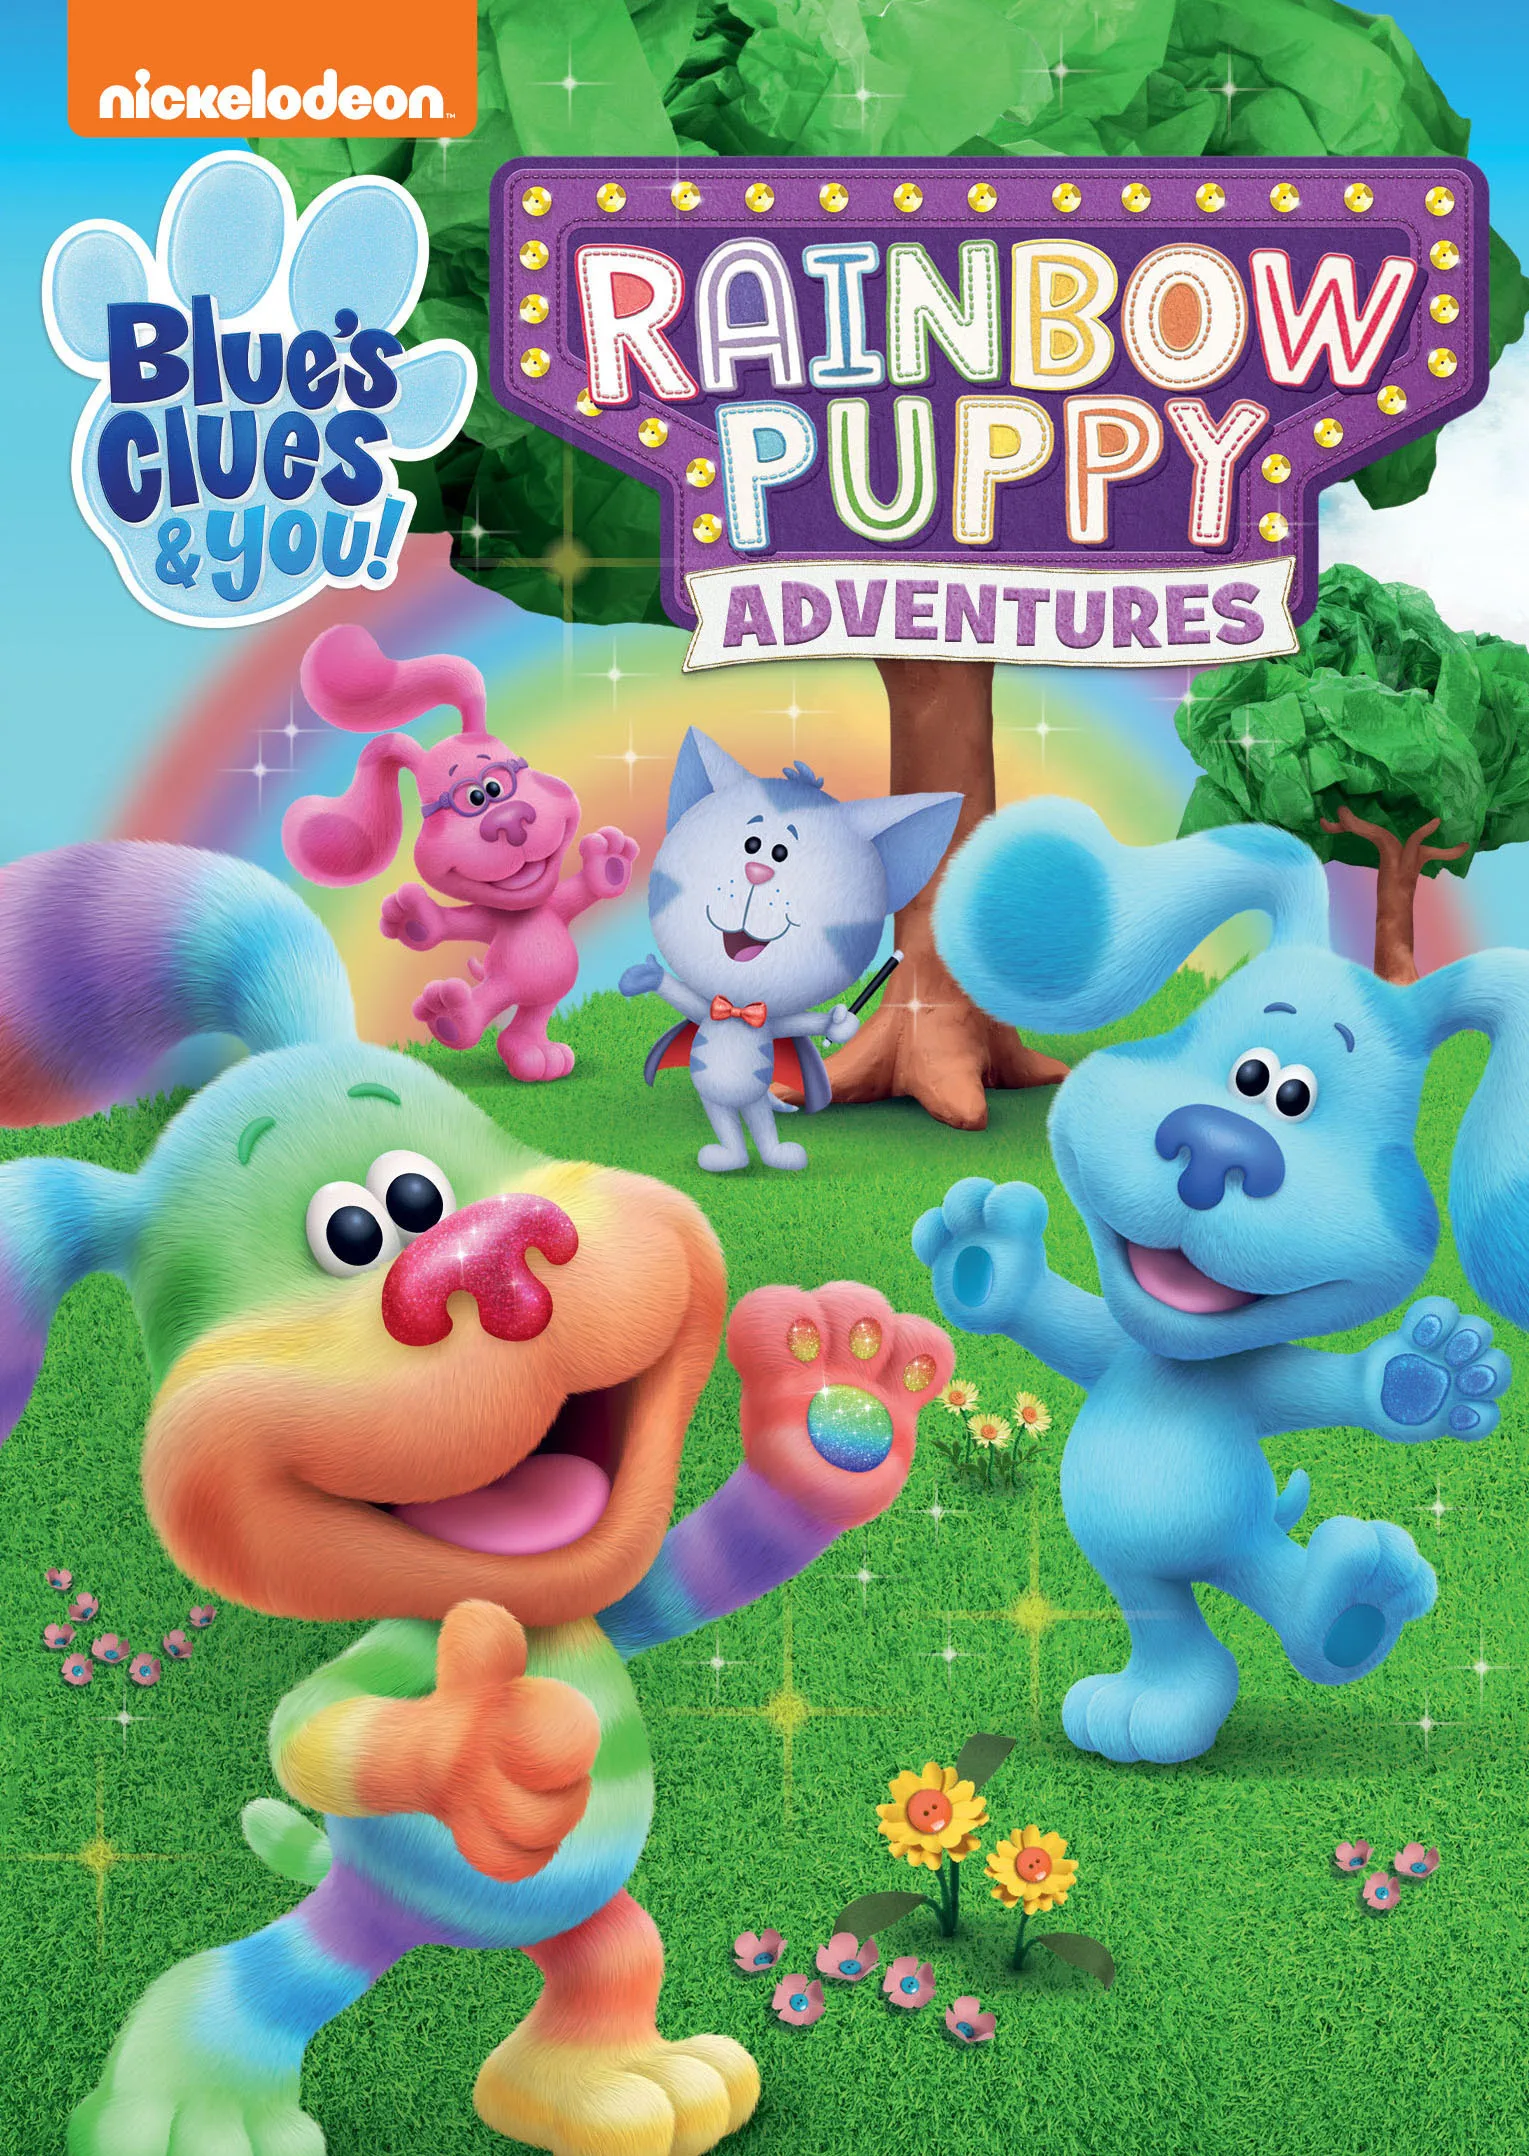 Blues Clues and you:: rainbow puppy adventures dvd art